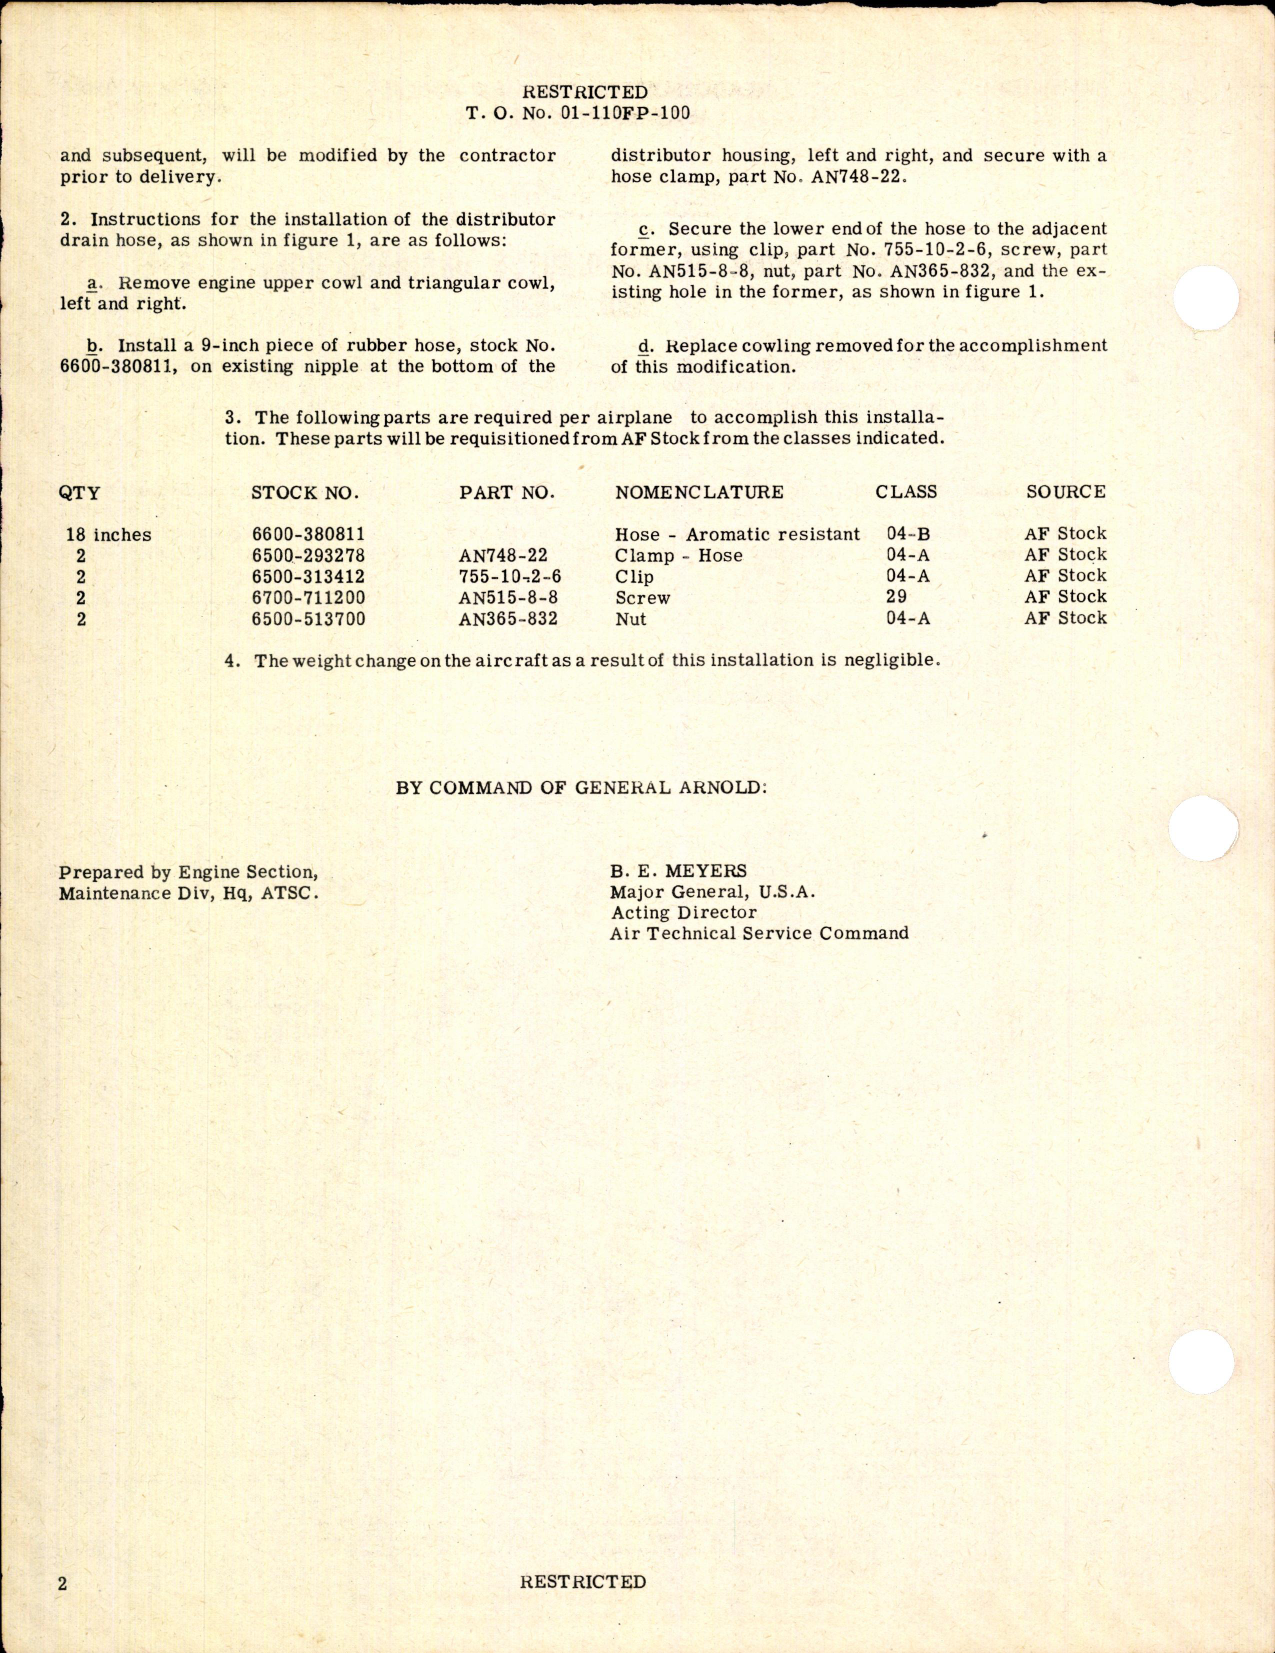 Sample page 2 from AirCorps Library document: Installation of Distributor Drainage Hose for P-63